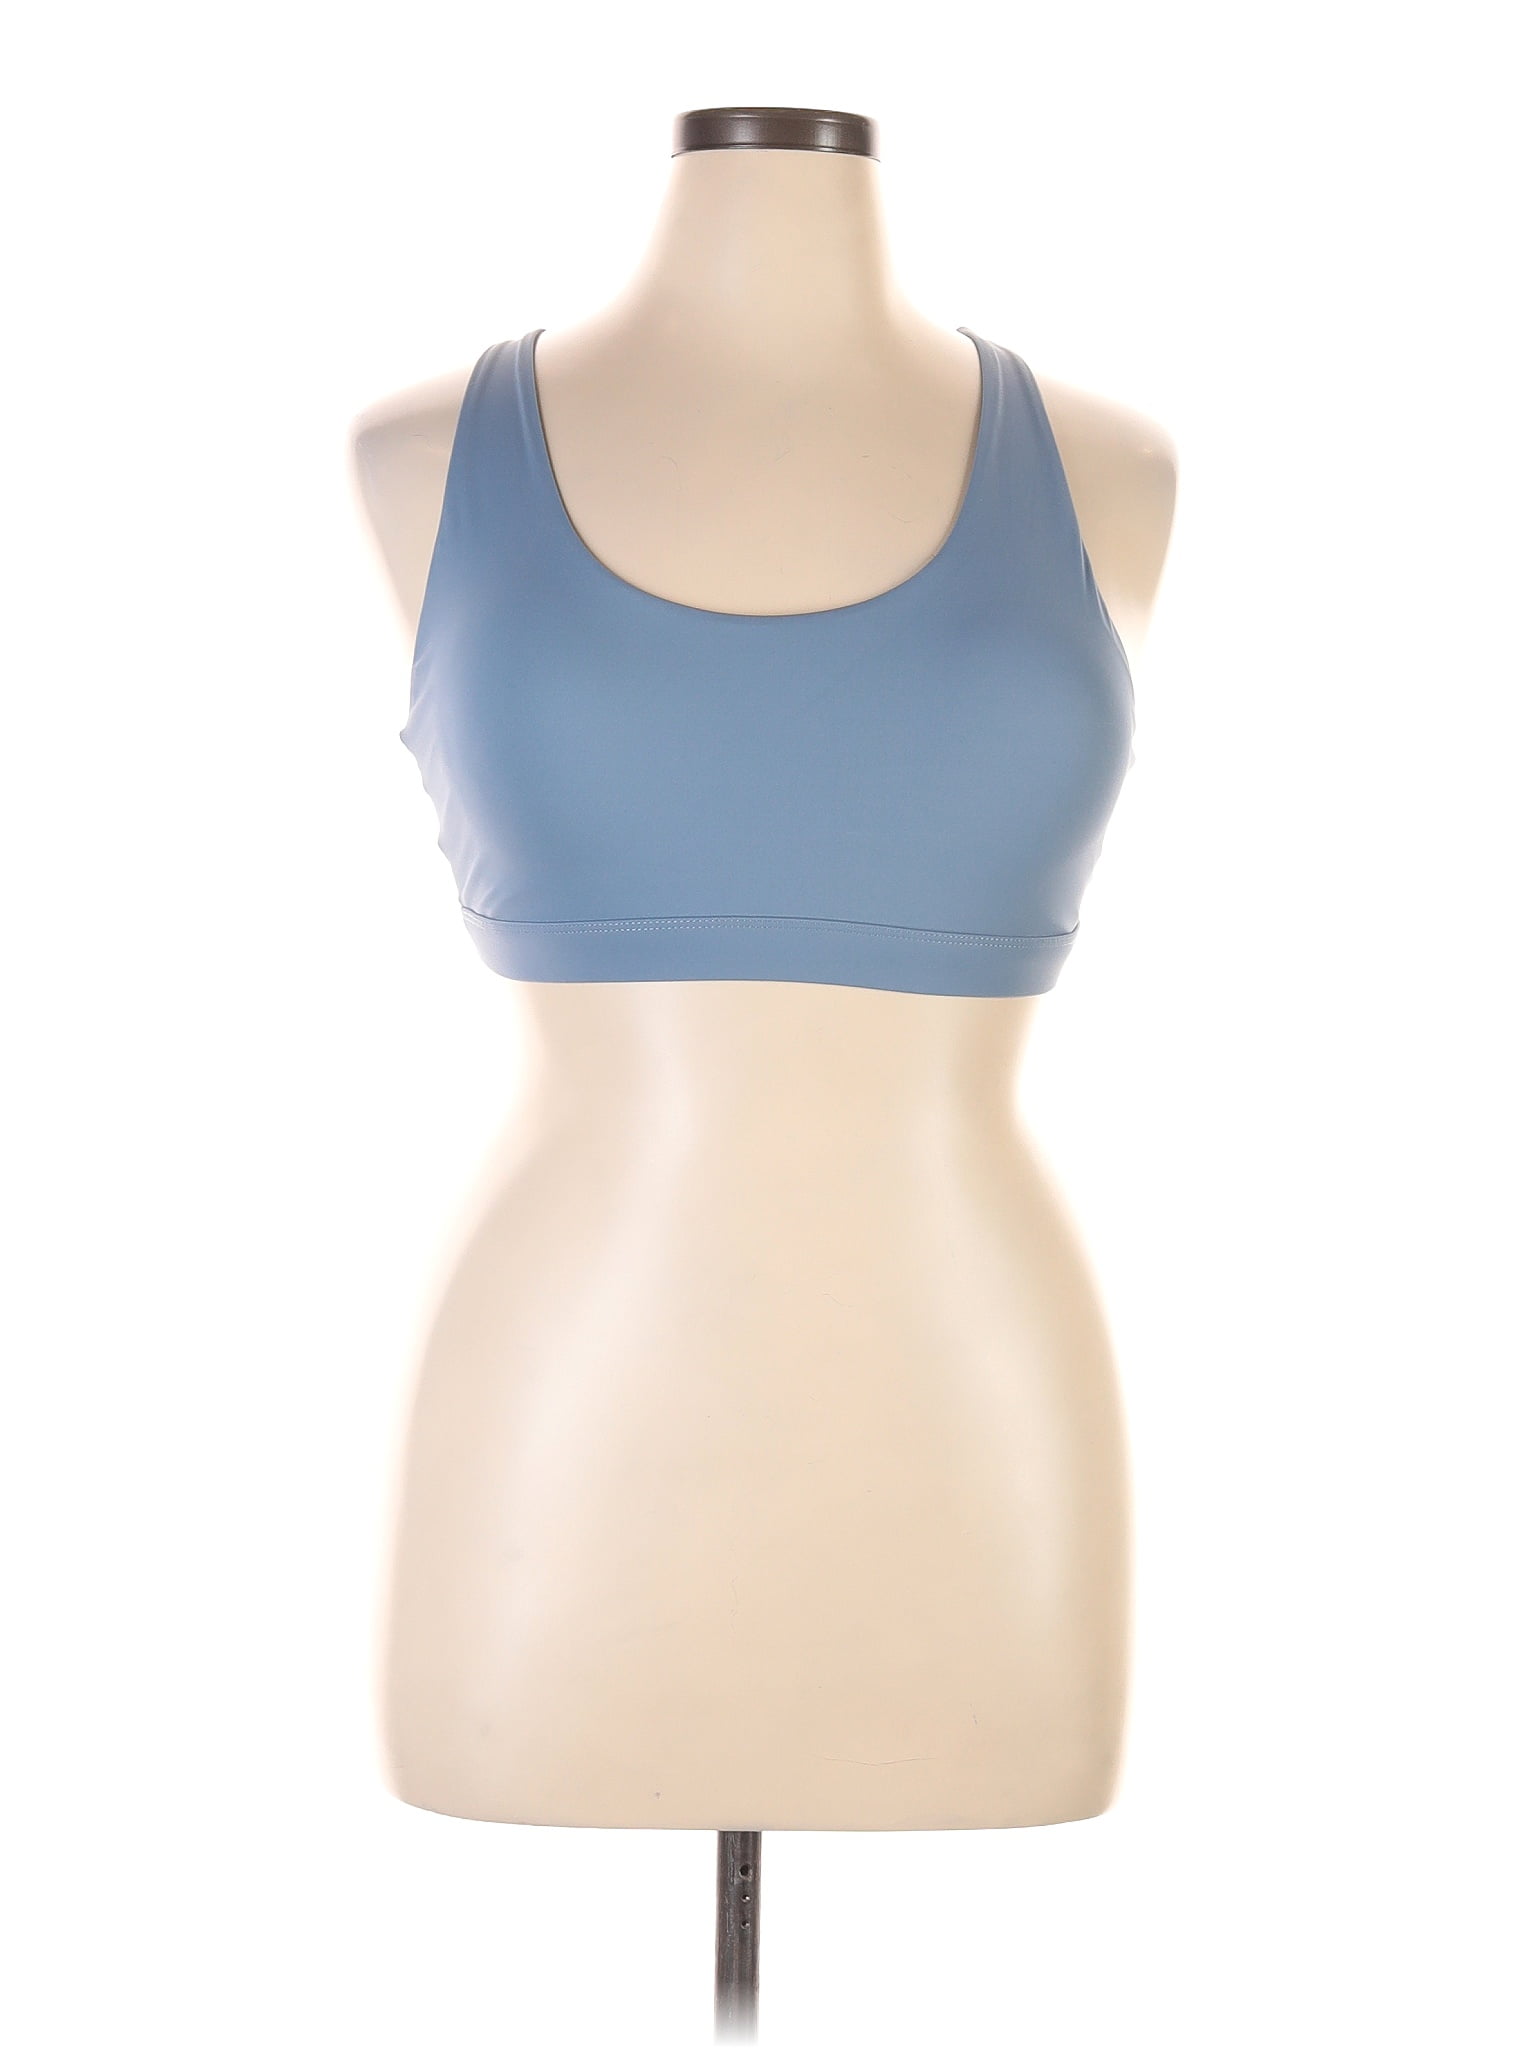 Under Armour Teal Sports Bra Size XL - 56% off